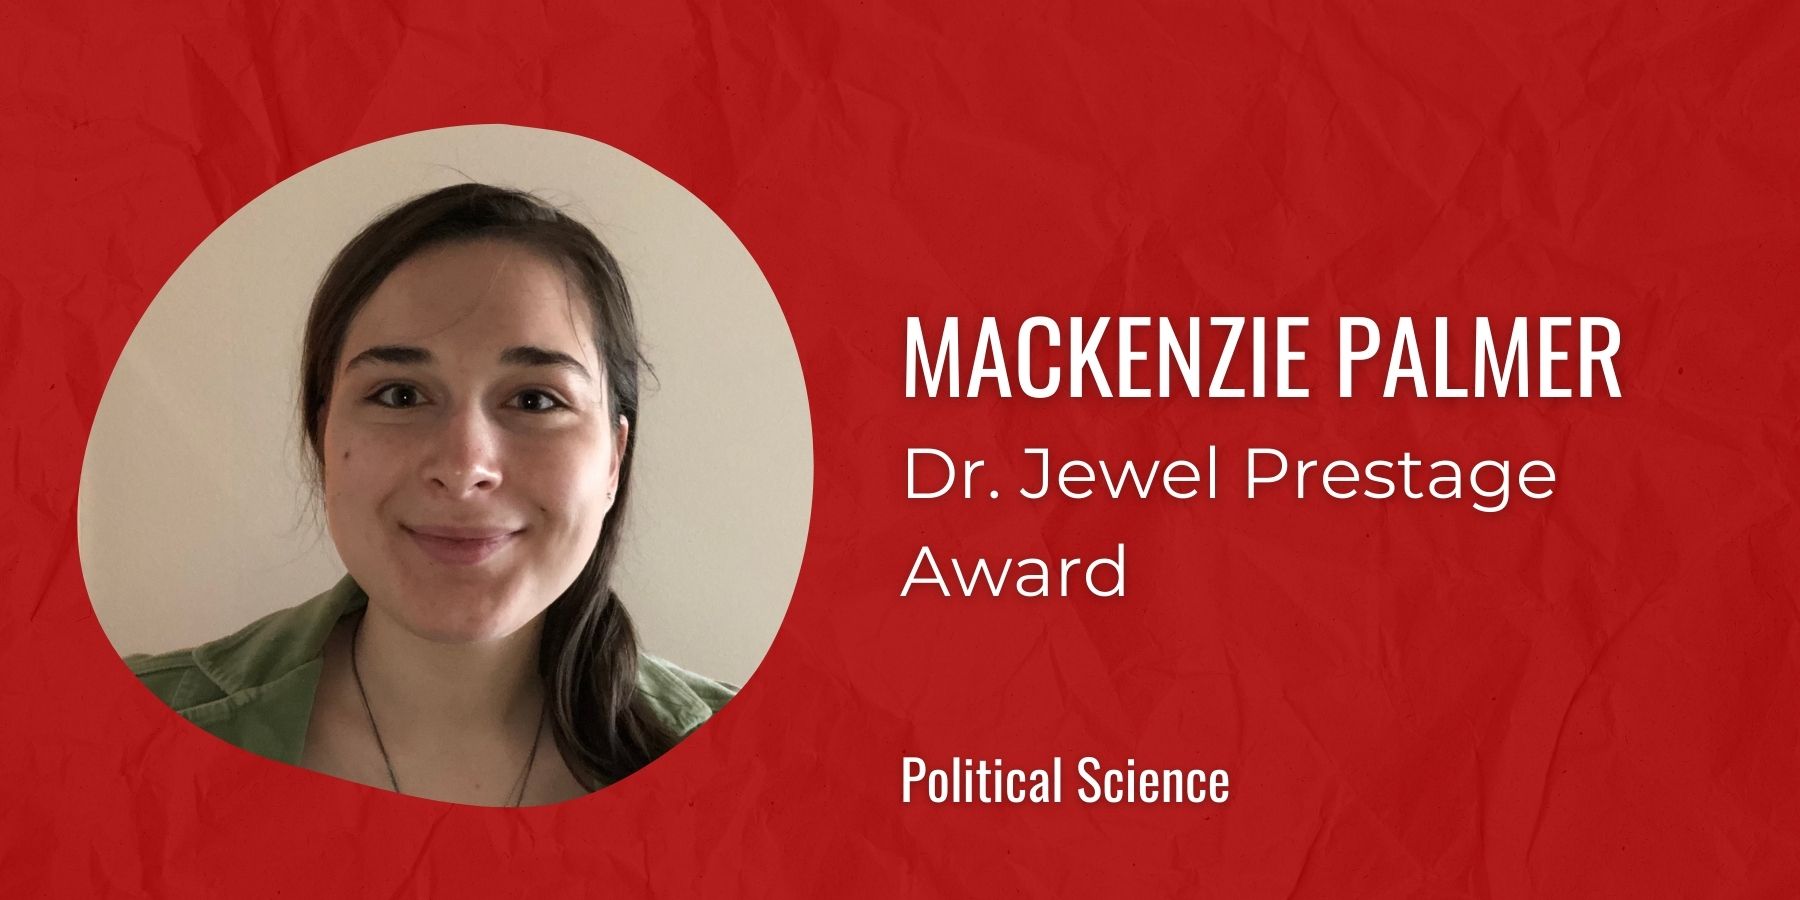 Image of MacKenzie Palmer with text: Dr. Jewel Prestage Award, Political Science
